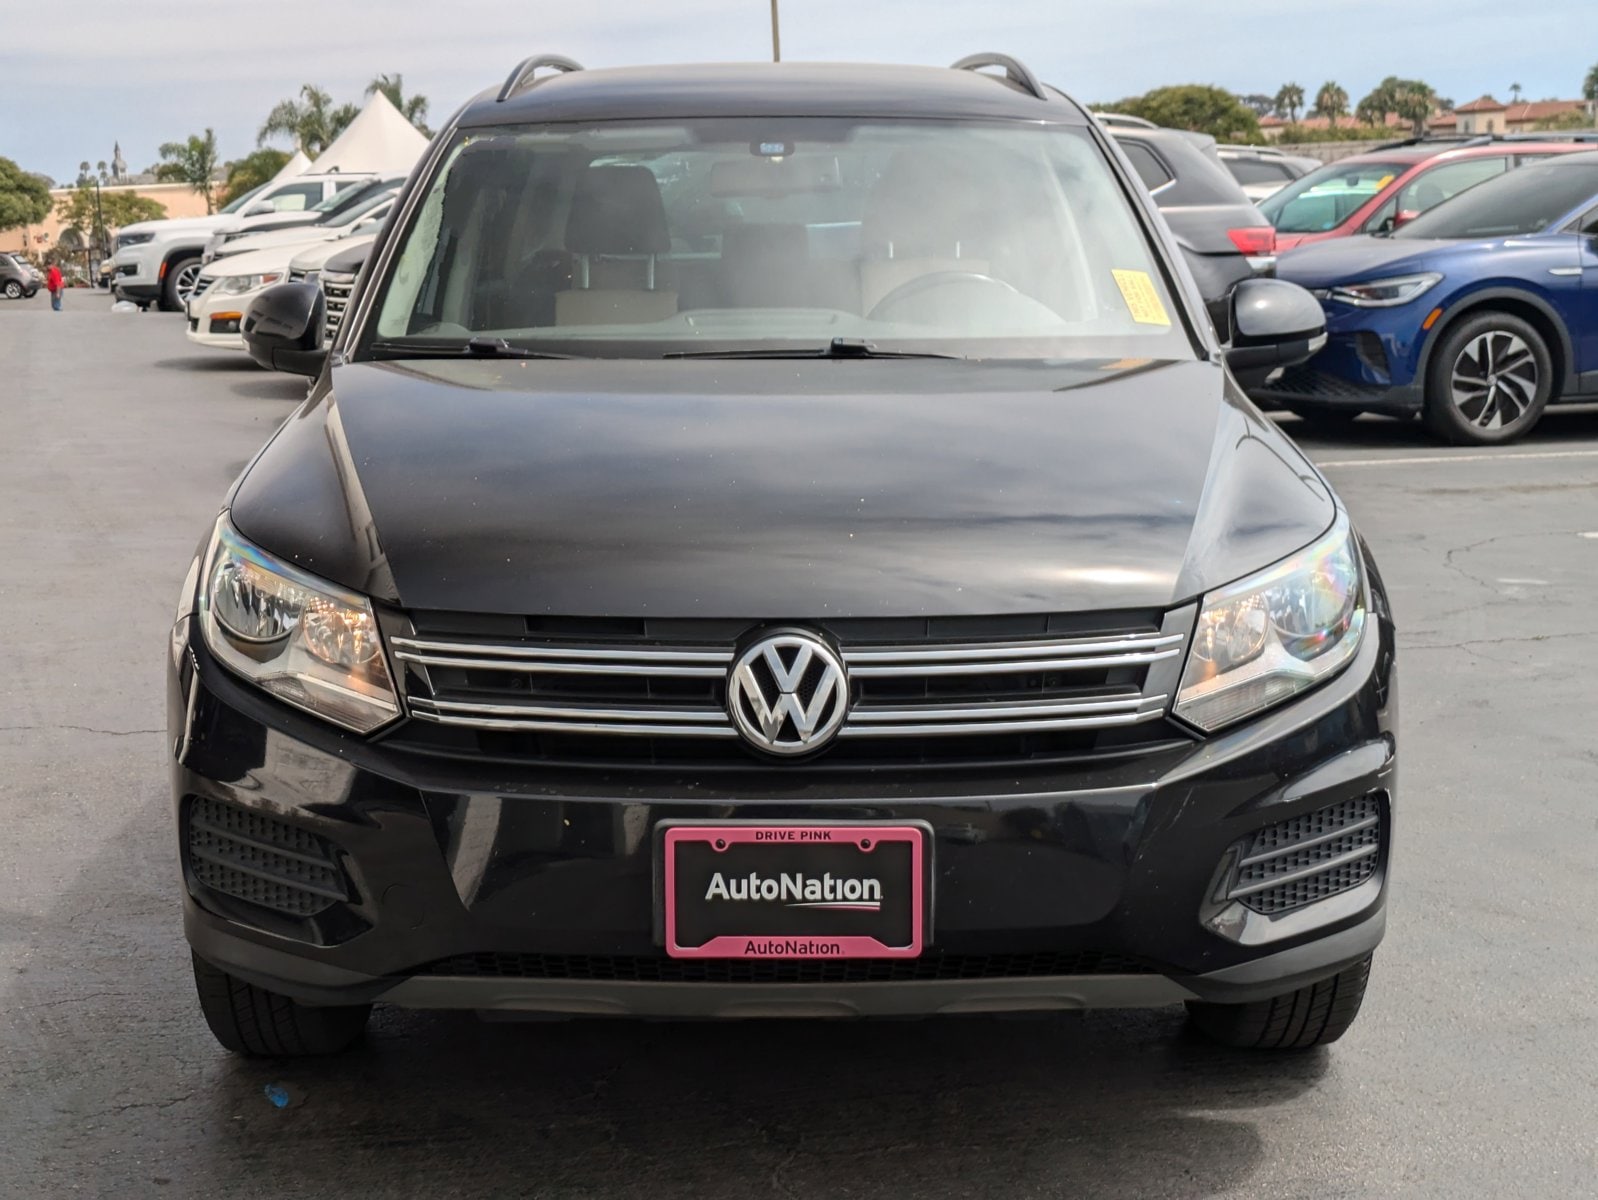 Used 2016 Volkswagen Tiguan S with VIN WVGAV7AX6GW585969 for sale in Carlsbad, CA